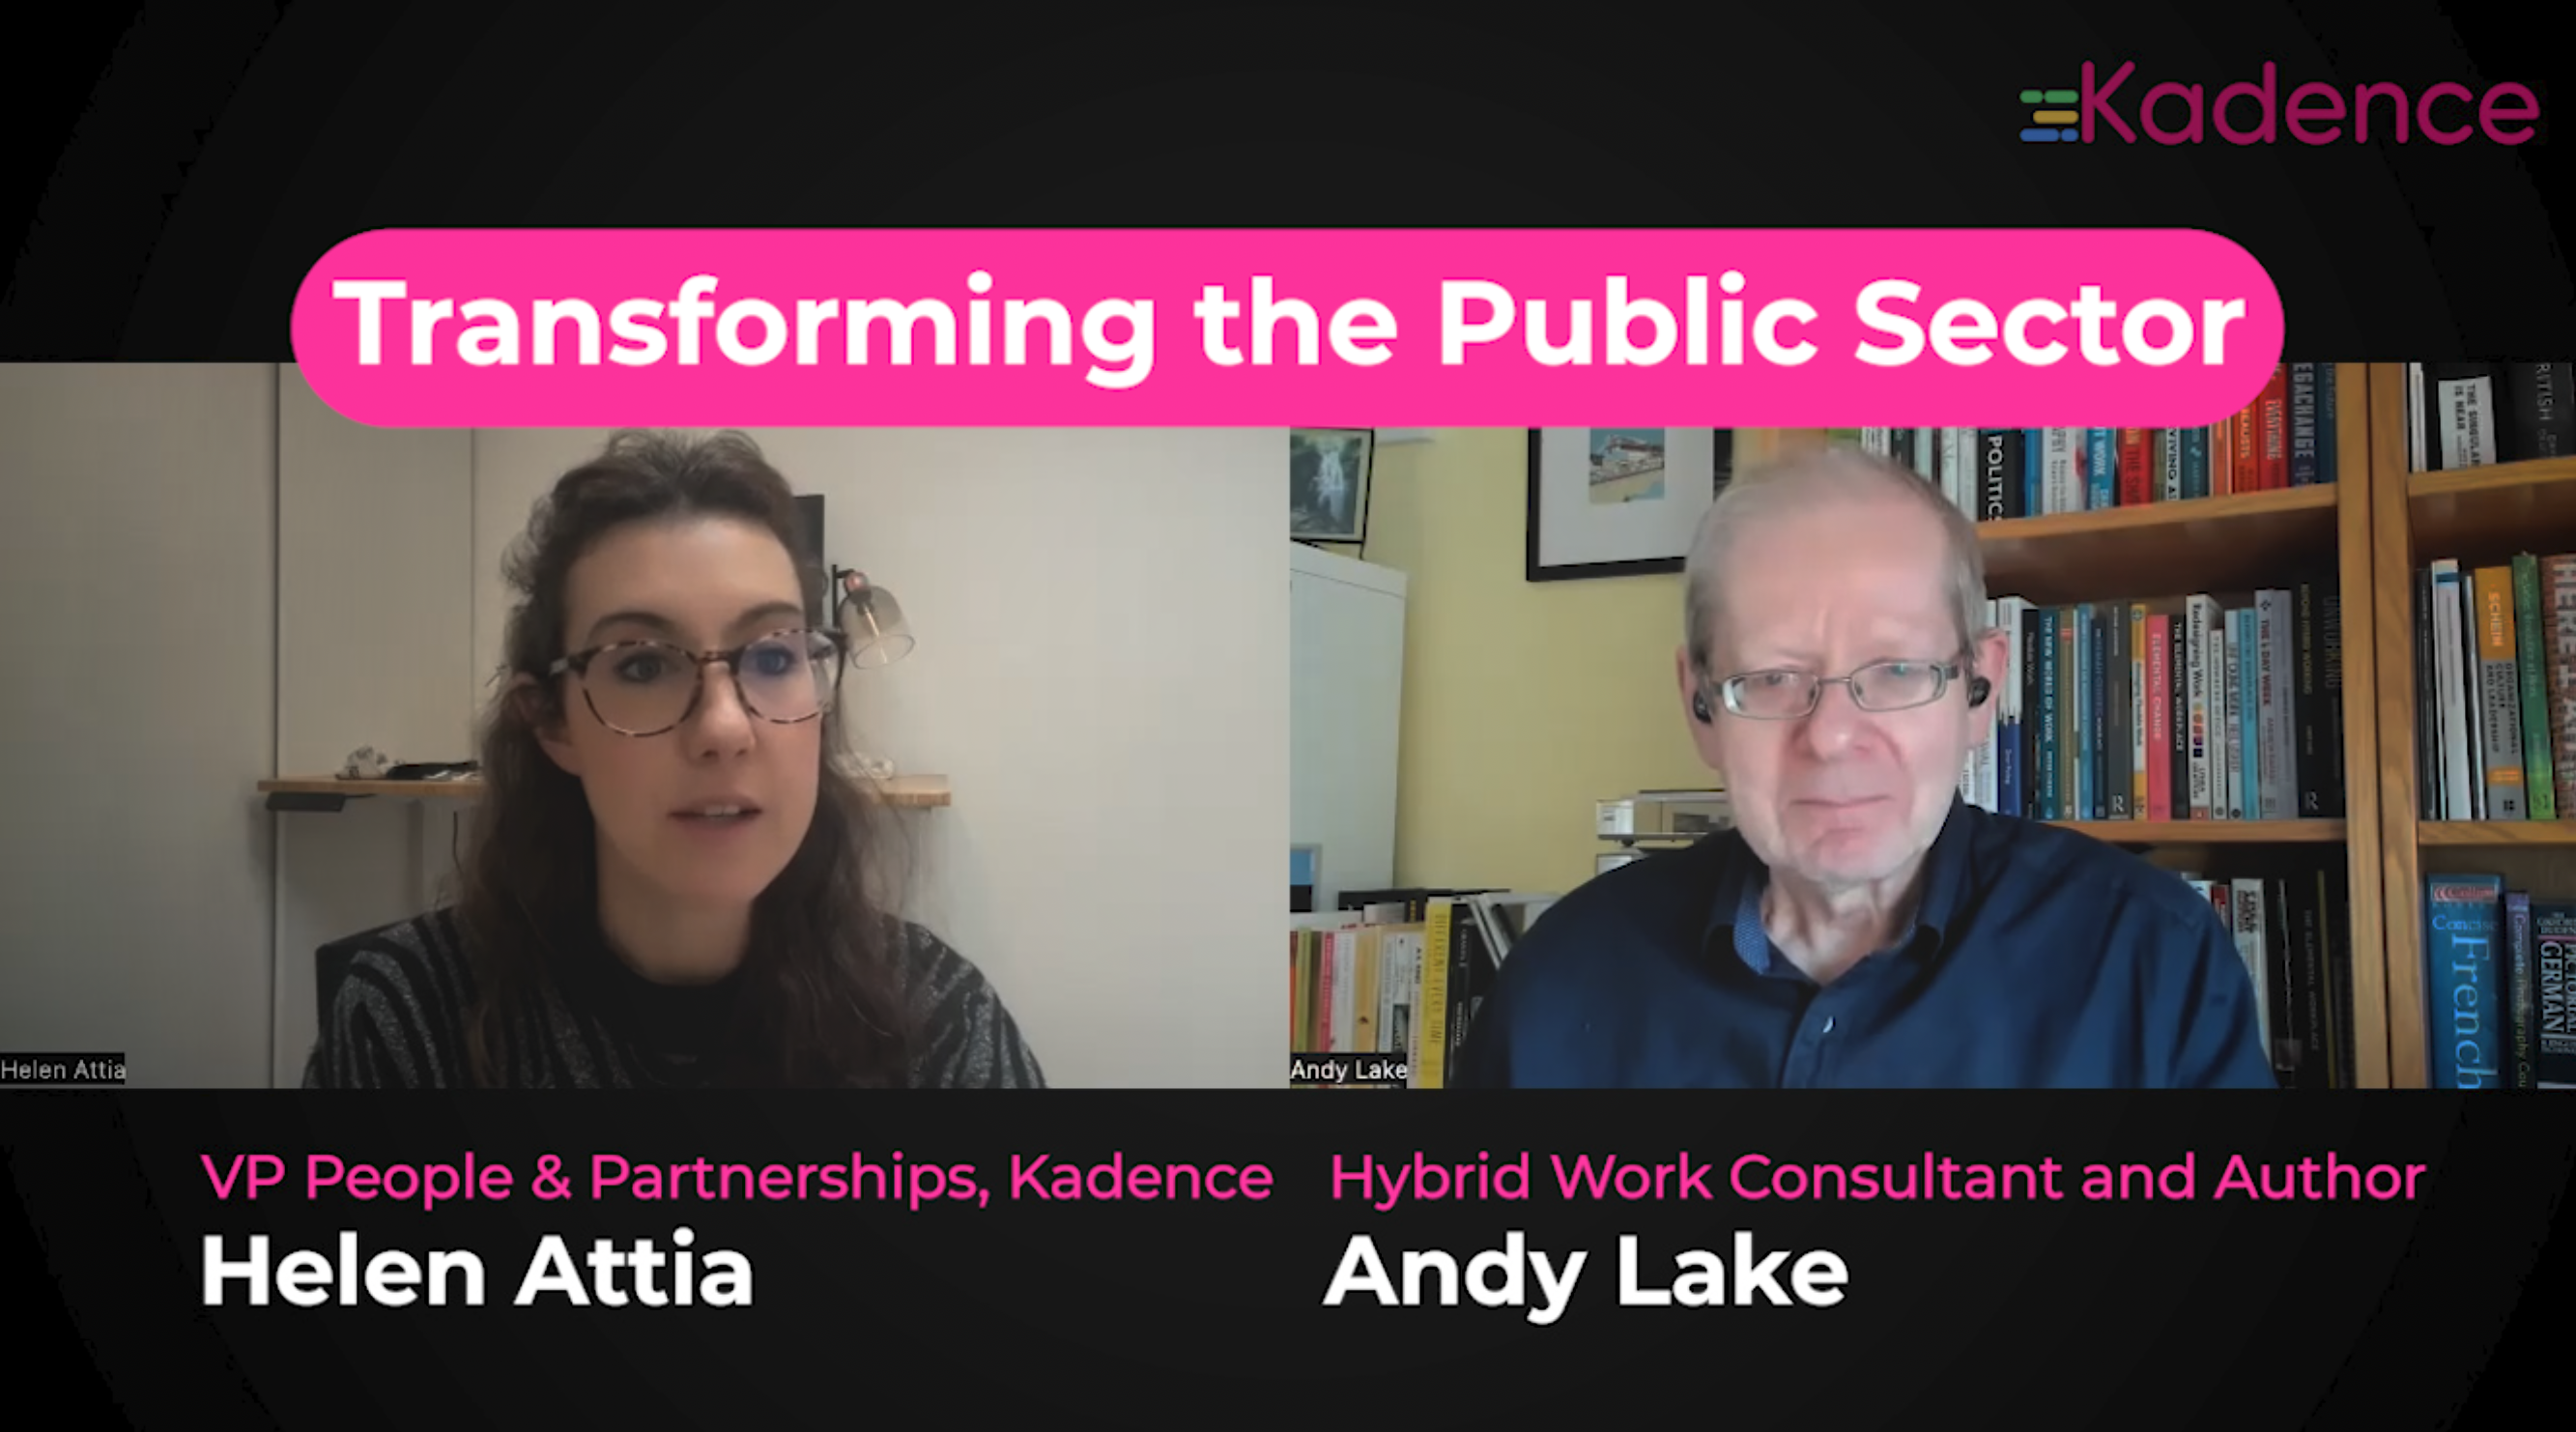 Transforming the Public Sector with Andy Lake